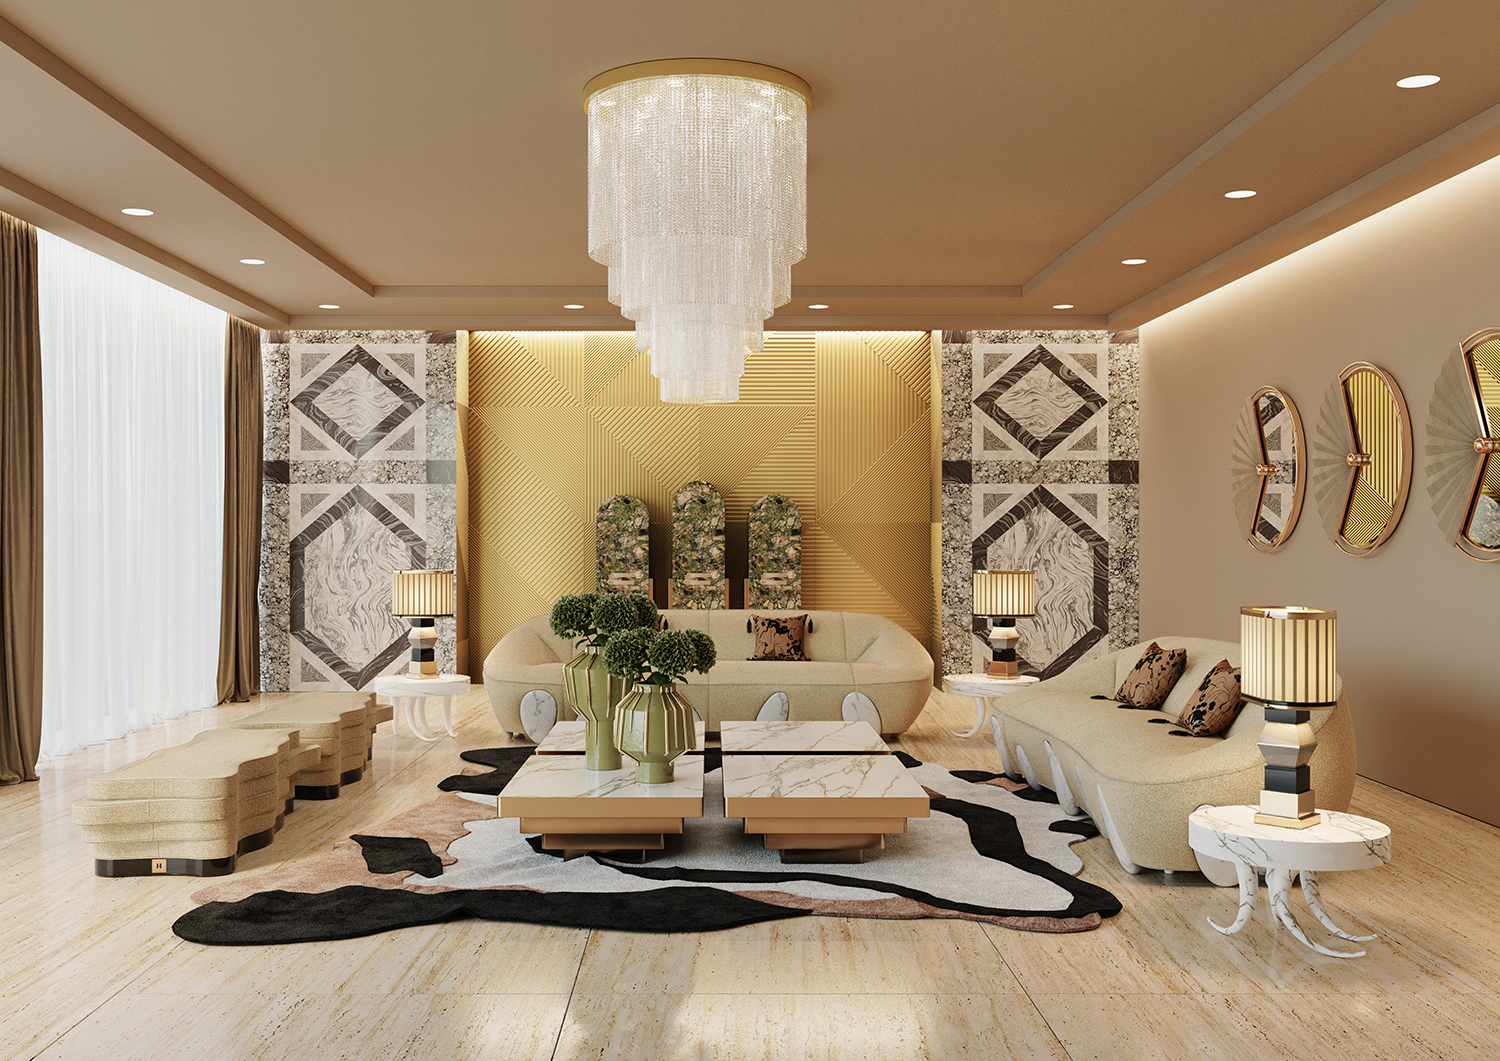 Don’t miss out on the hottest interior design trends 2021